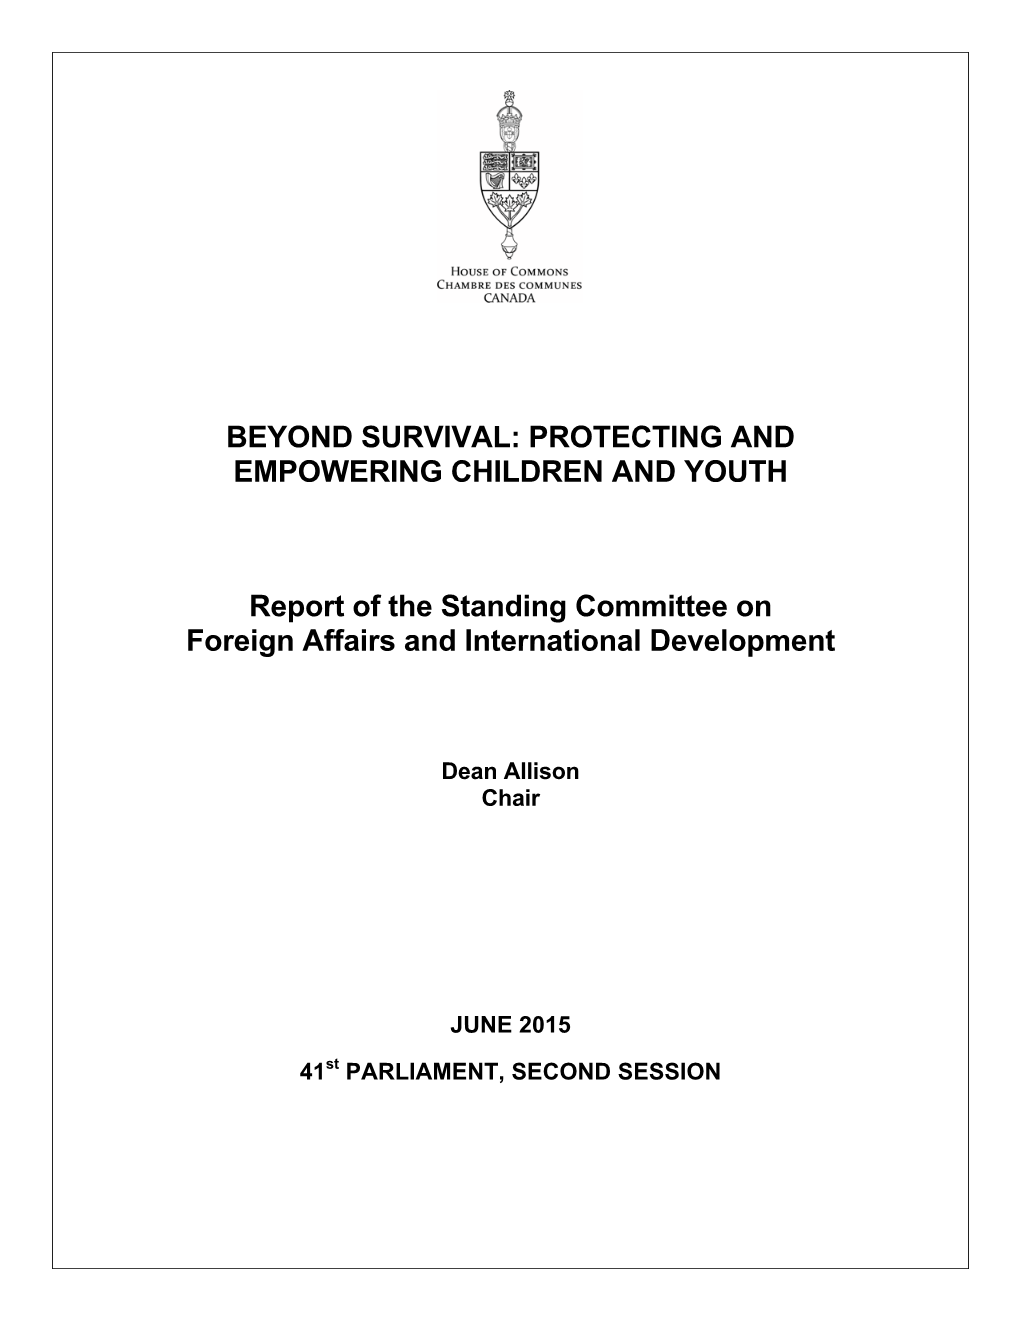 Beyond Survival: Protecting and Empowering Children and Youth